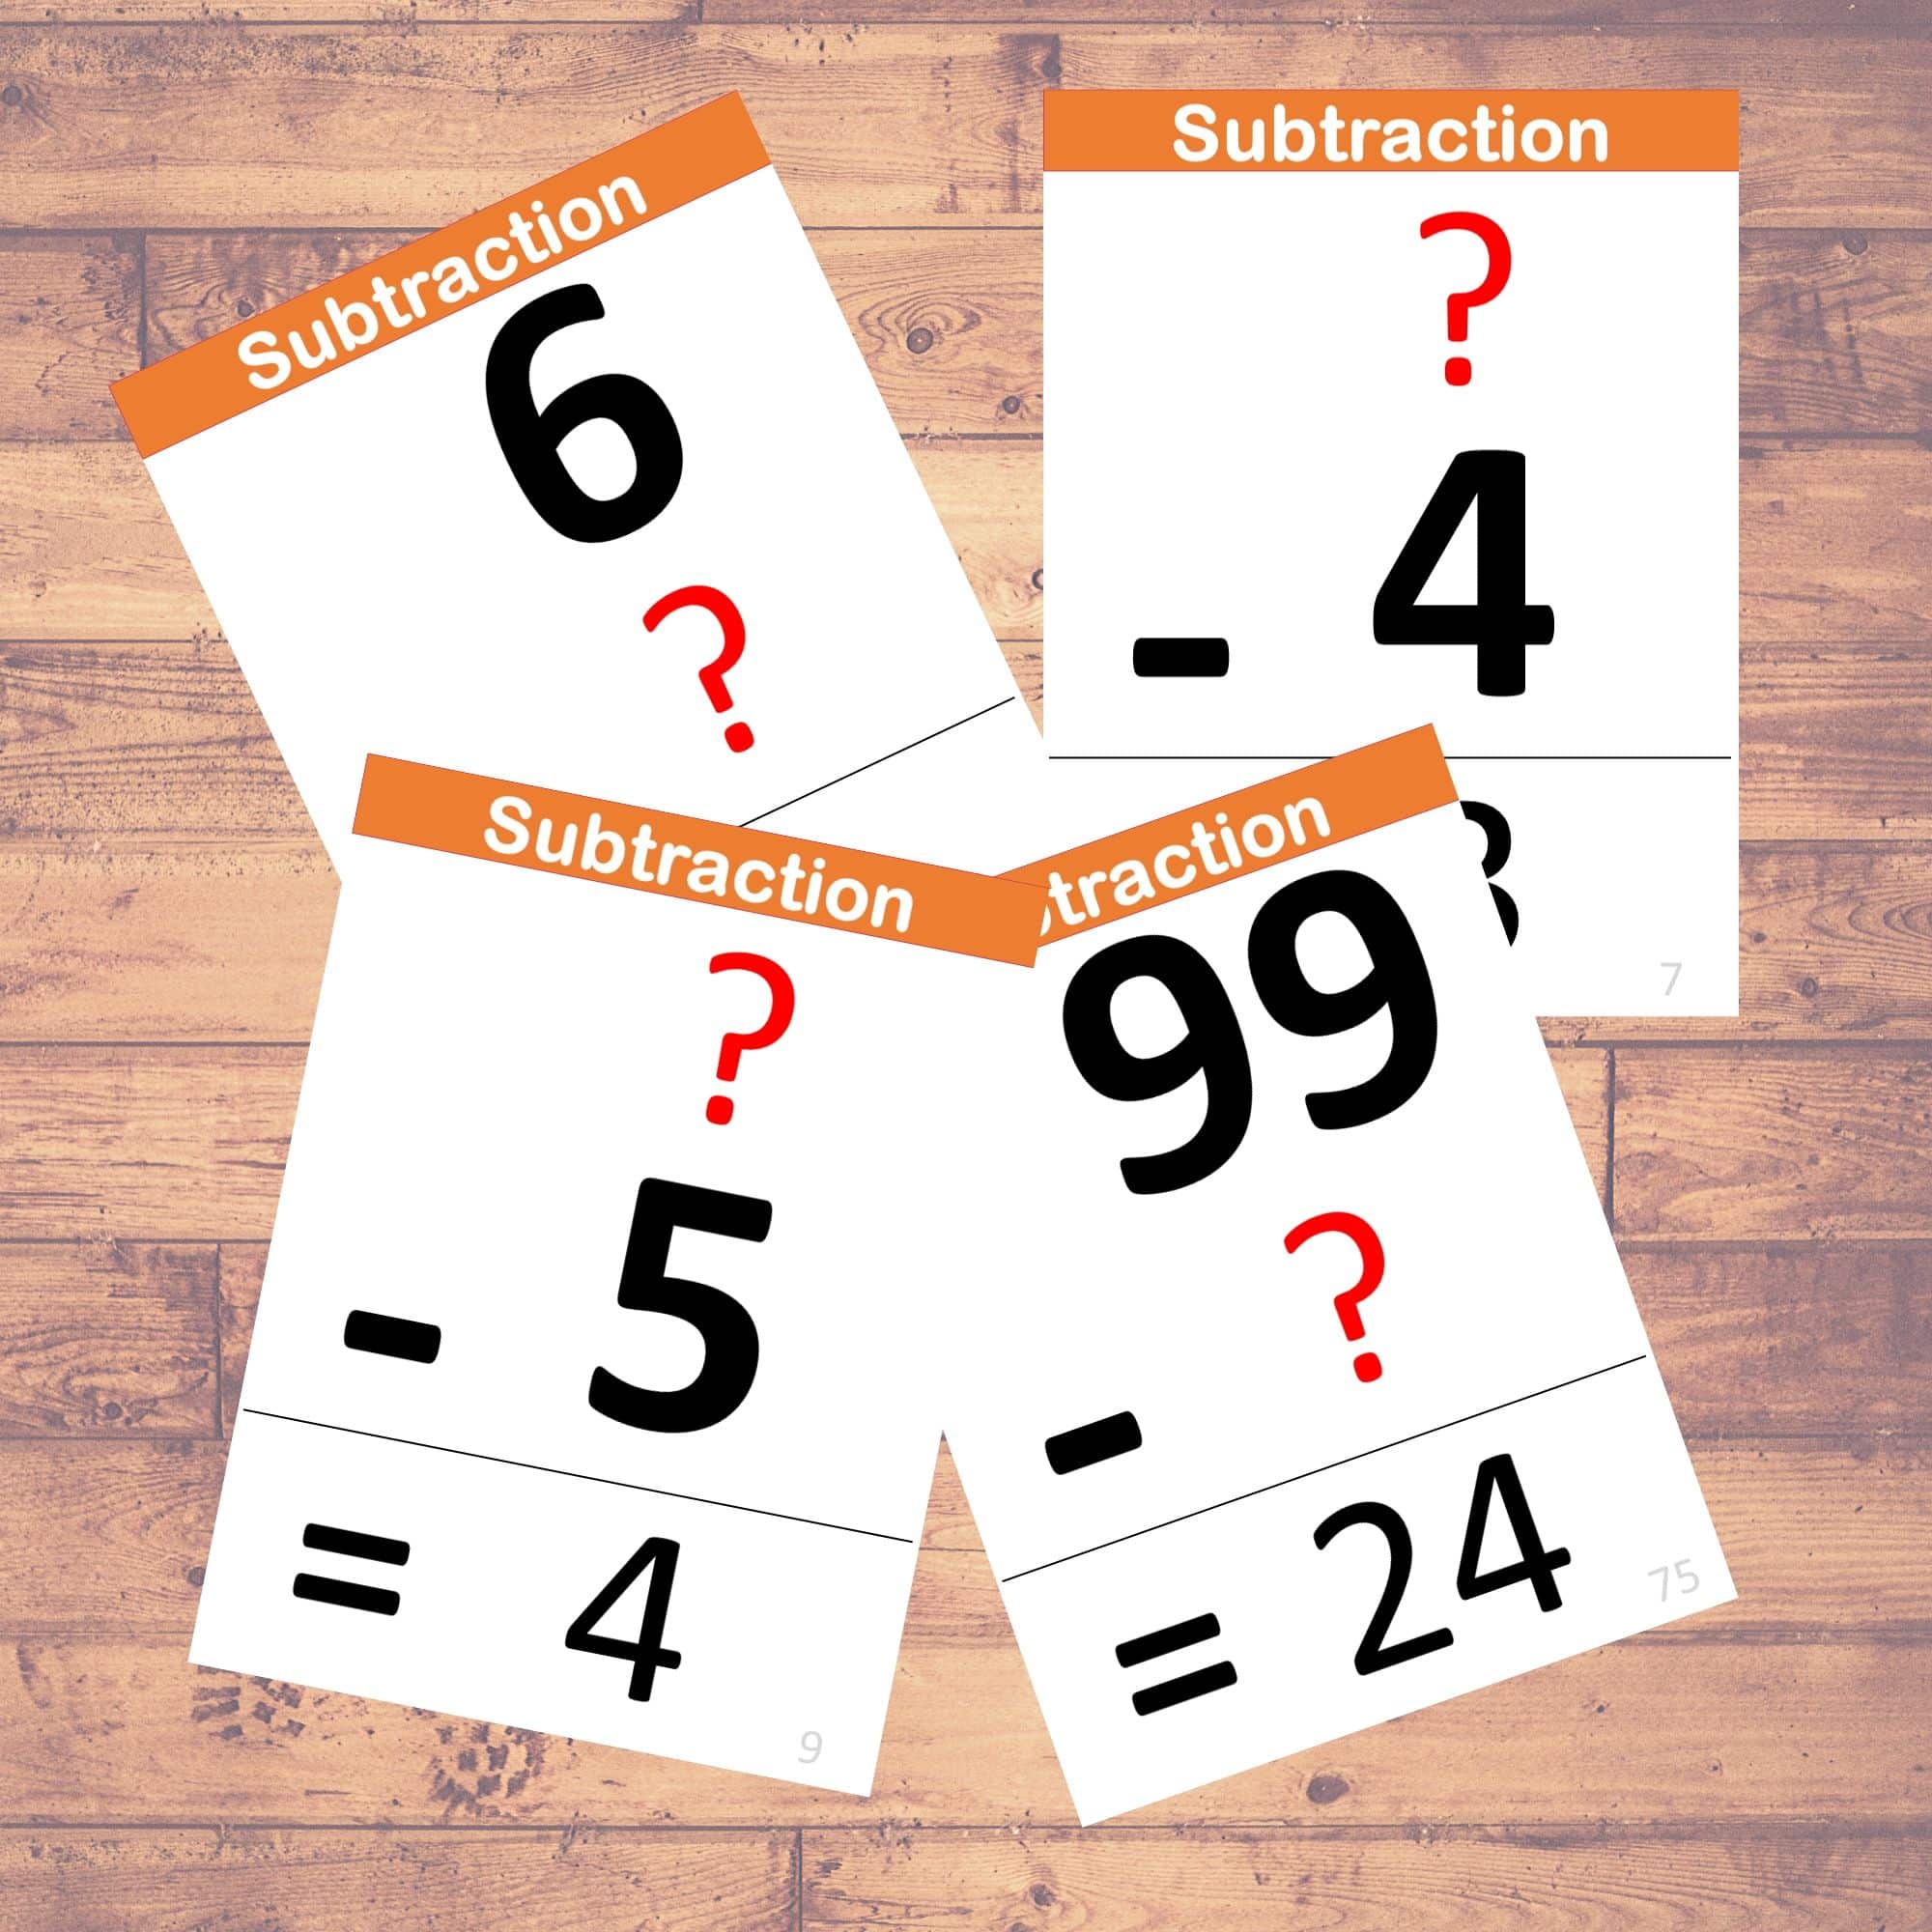 subtraction-problems-flashcards-math-learning-40-cards-lifelolo